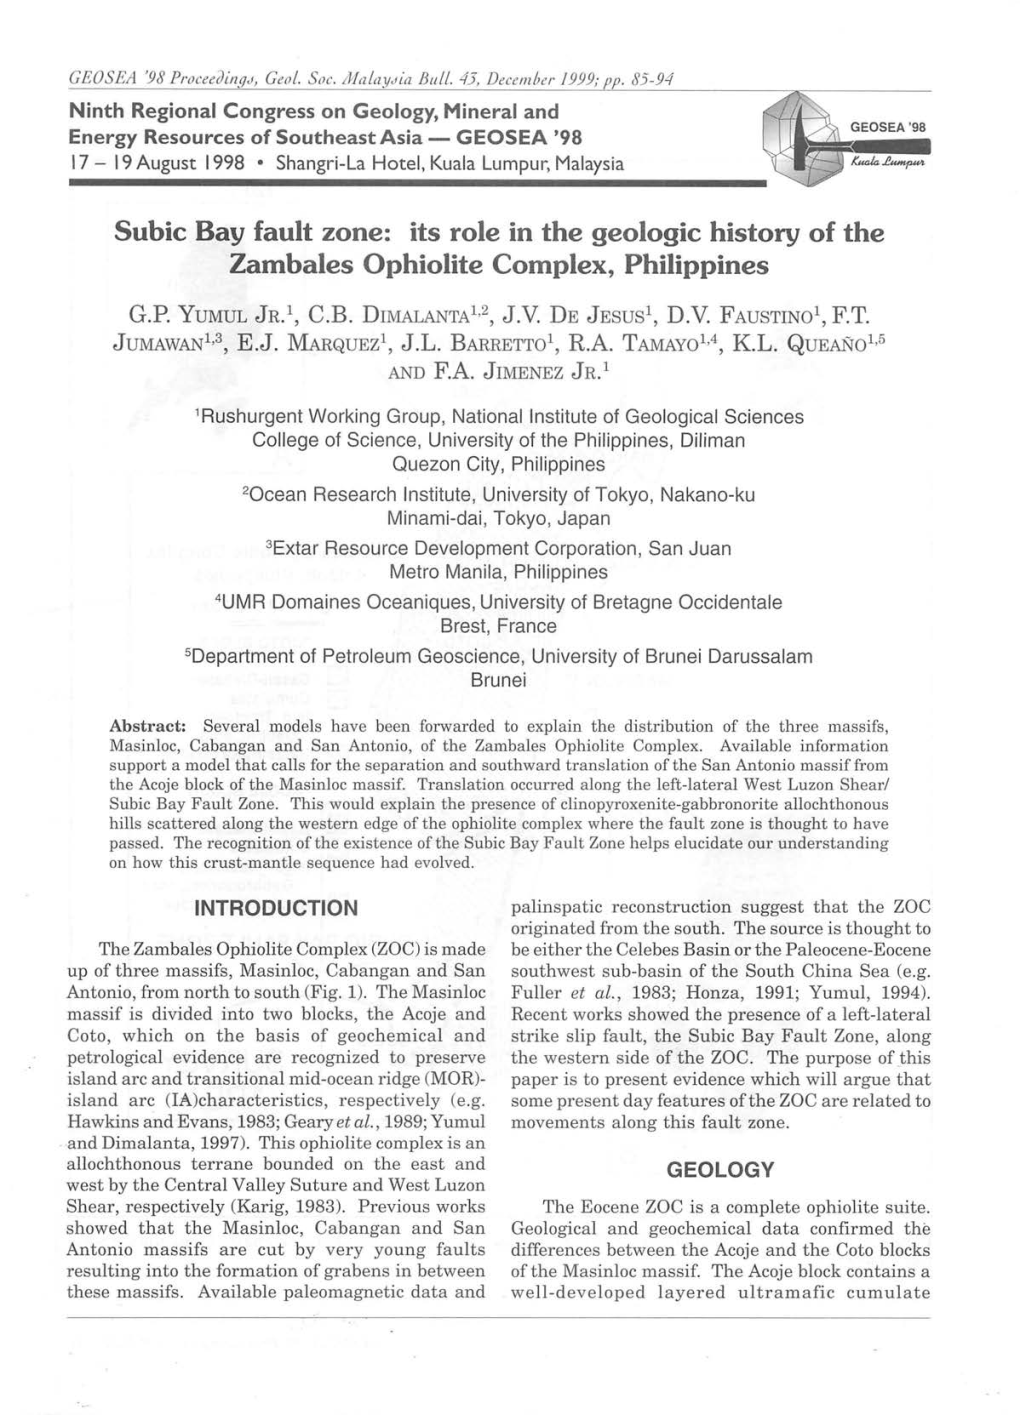 Subic Bay Fault Zone: Its Role in the Geologic History of the Zambales Ophiolite Complex, Philippines